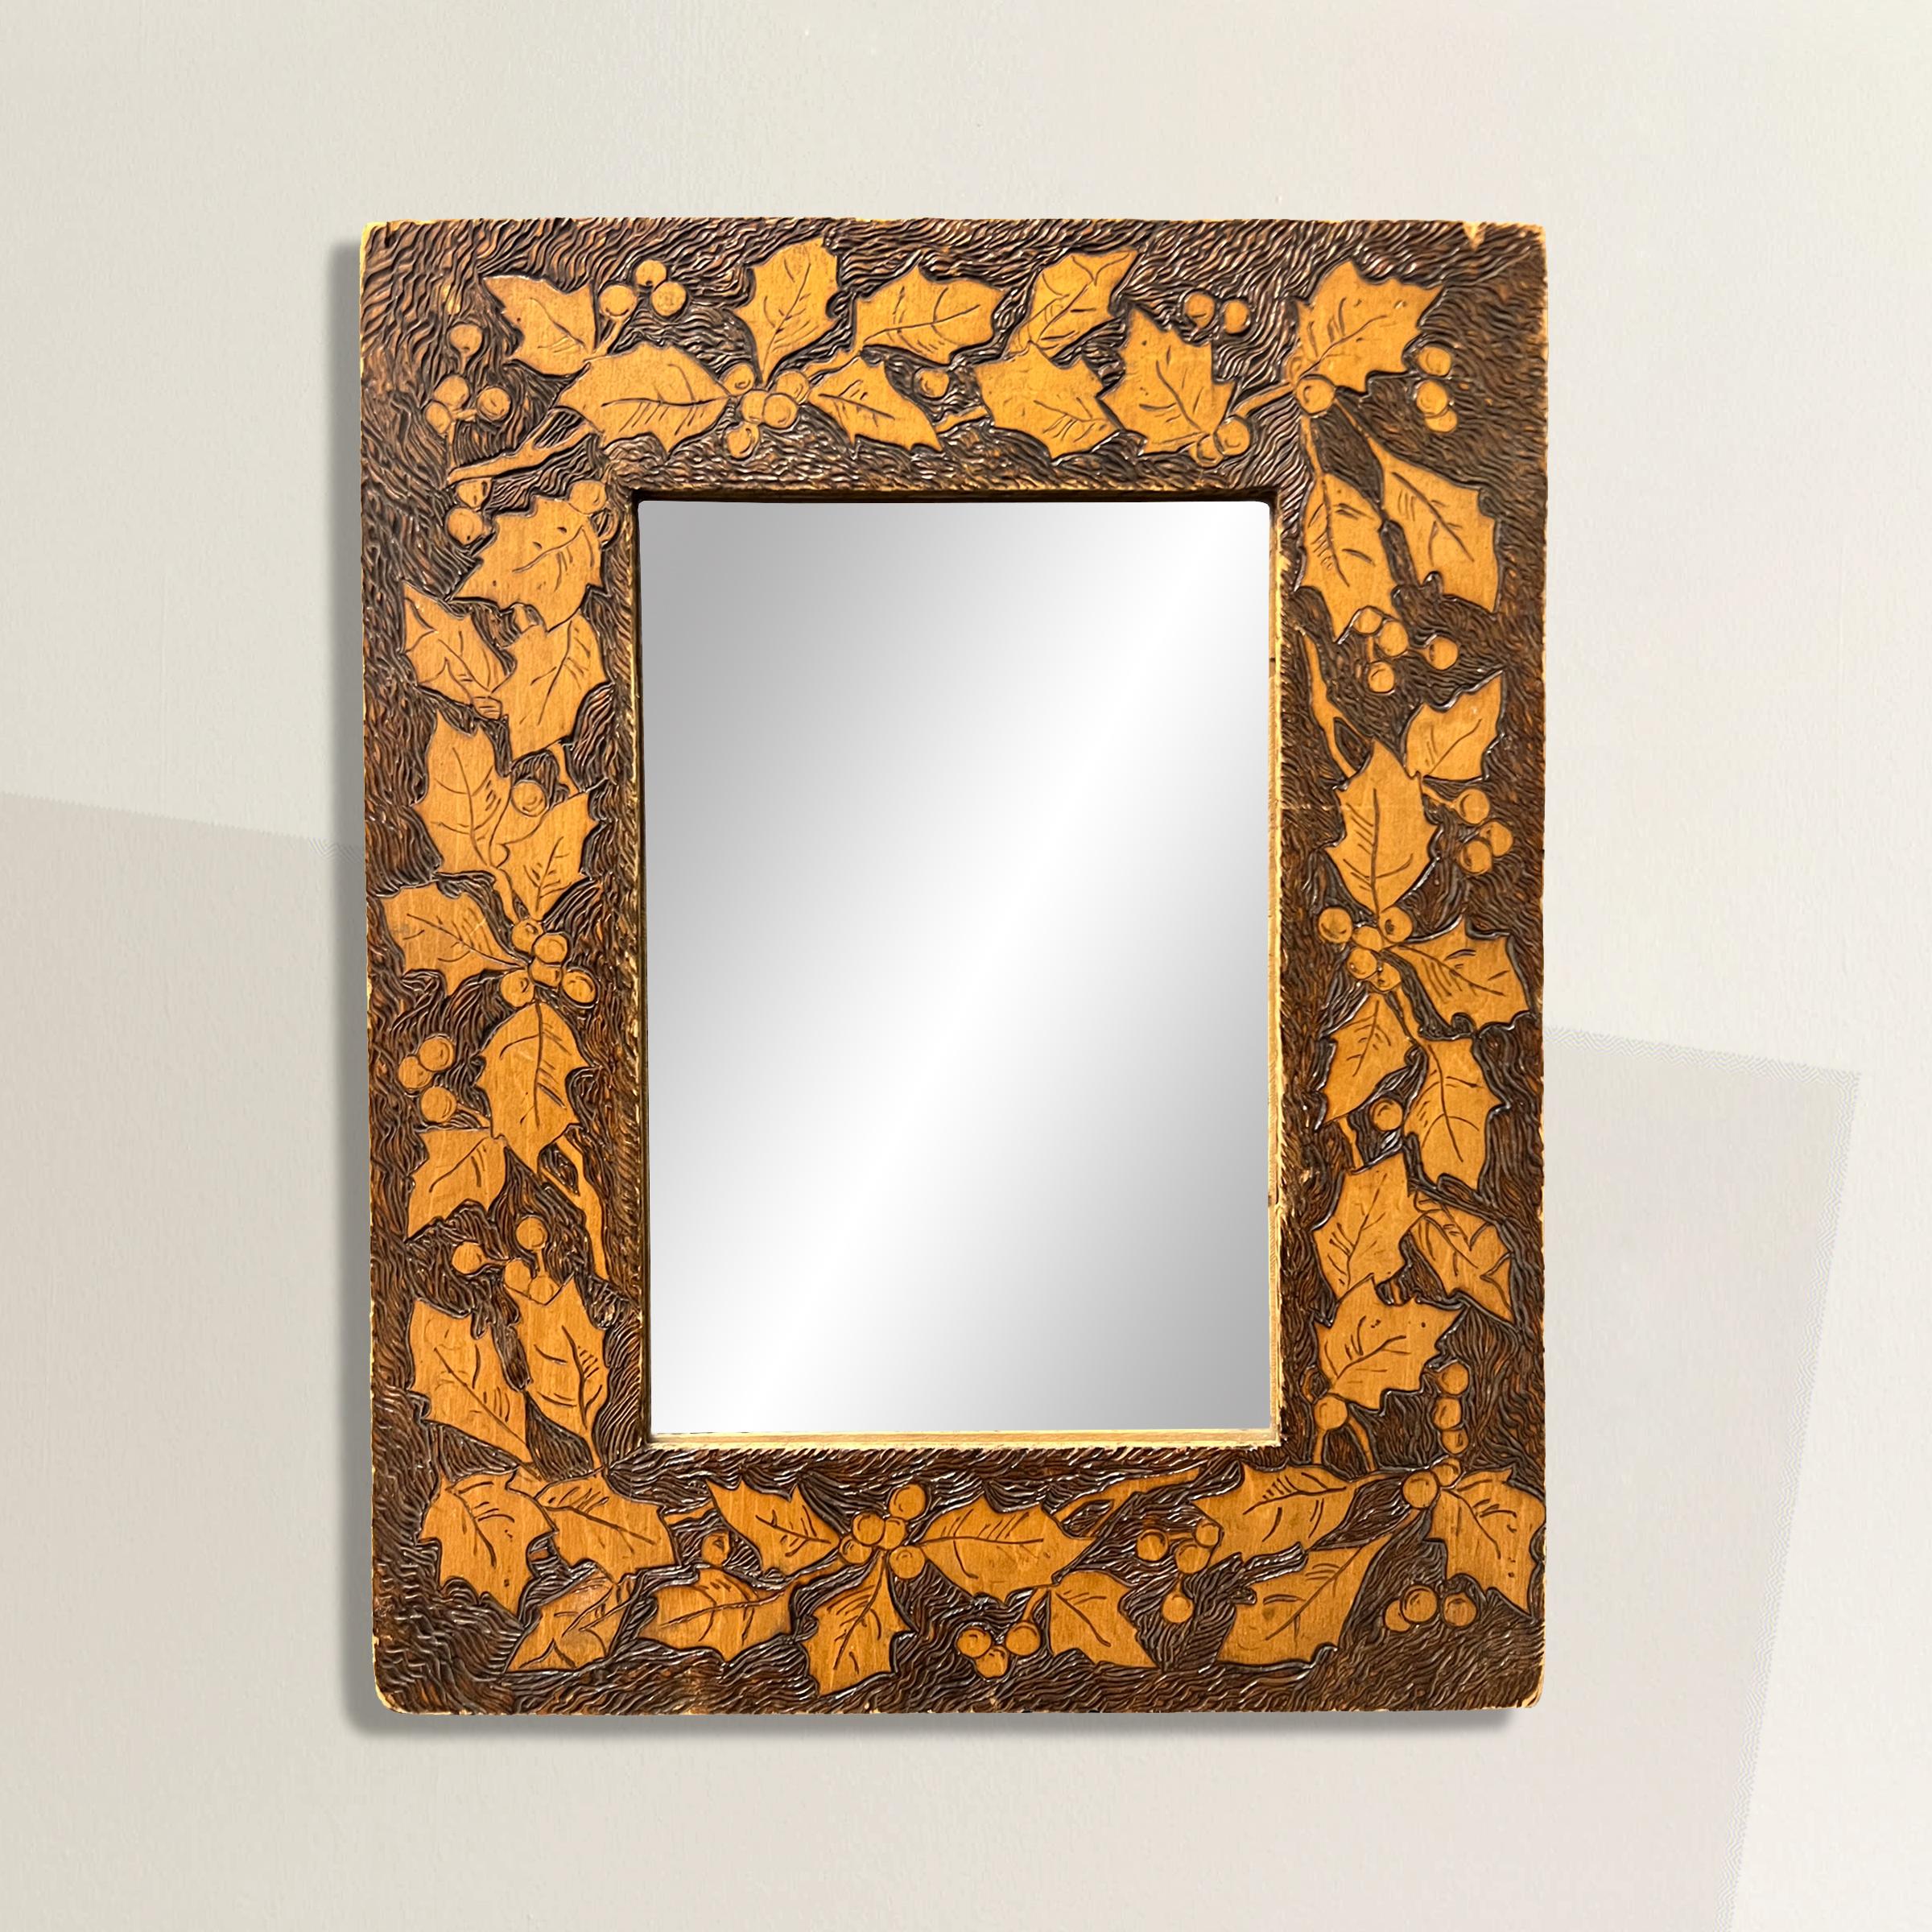 A sweet and sophisticated late 19th century American pyrography framed mirror with a hand-carved holly and berries pattern and a finely carved pattern behind the foliage. Pyrography is a 17th century technique that uses a heated poker to free-hand